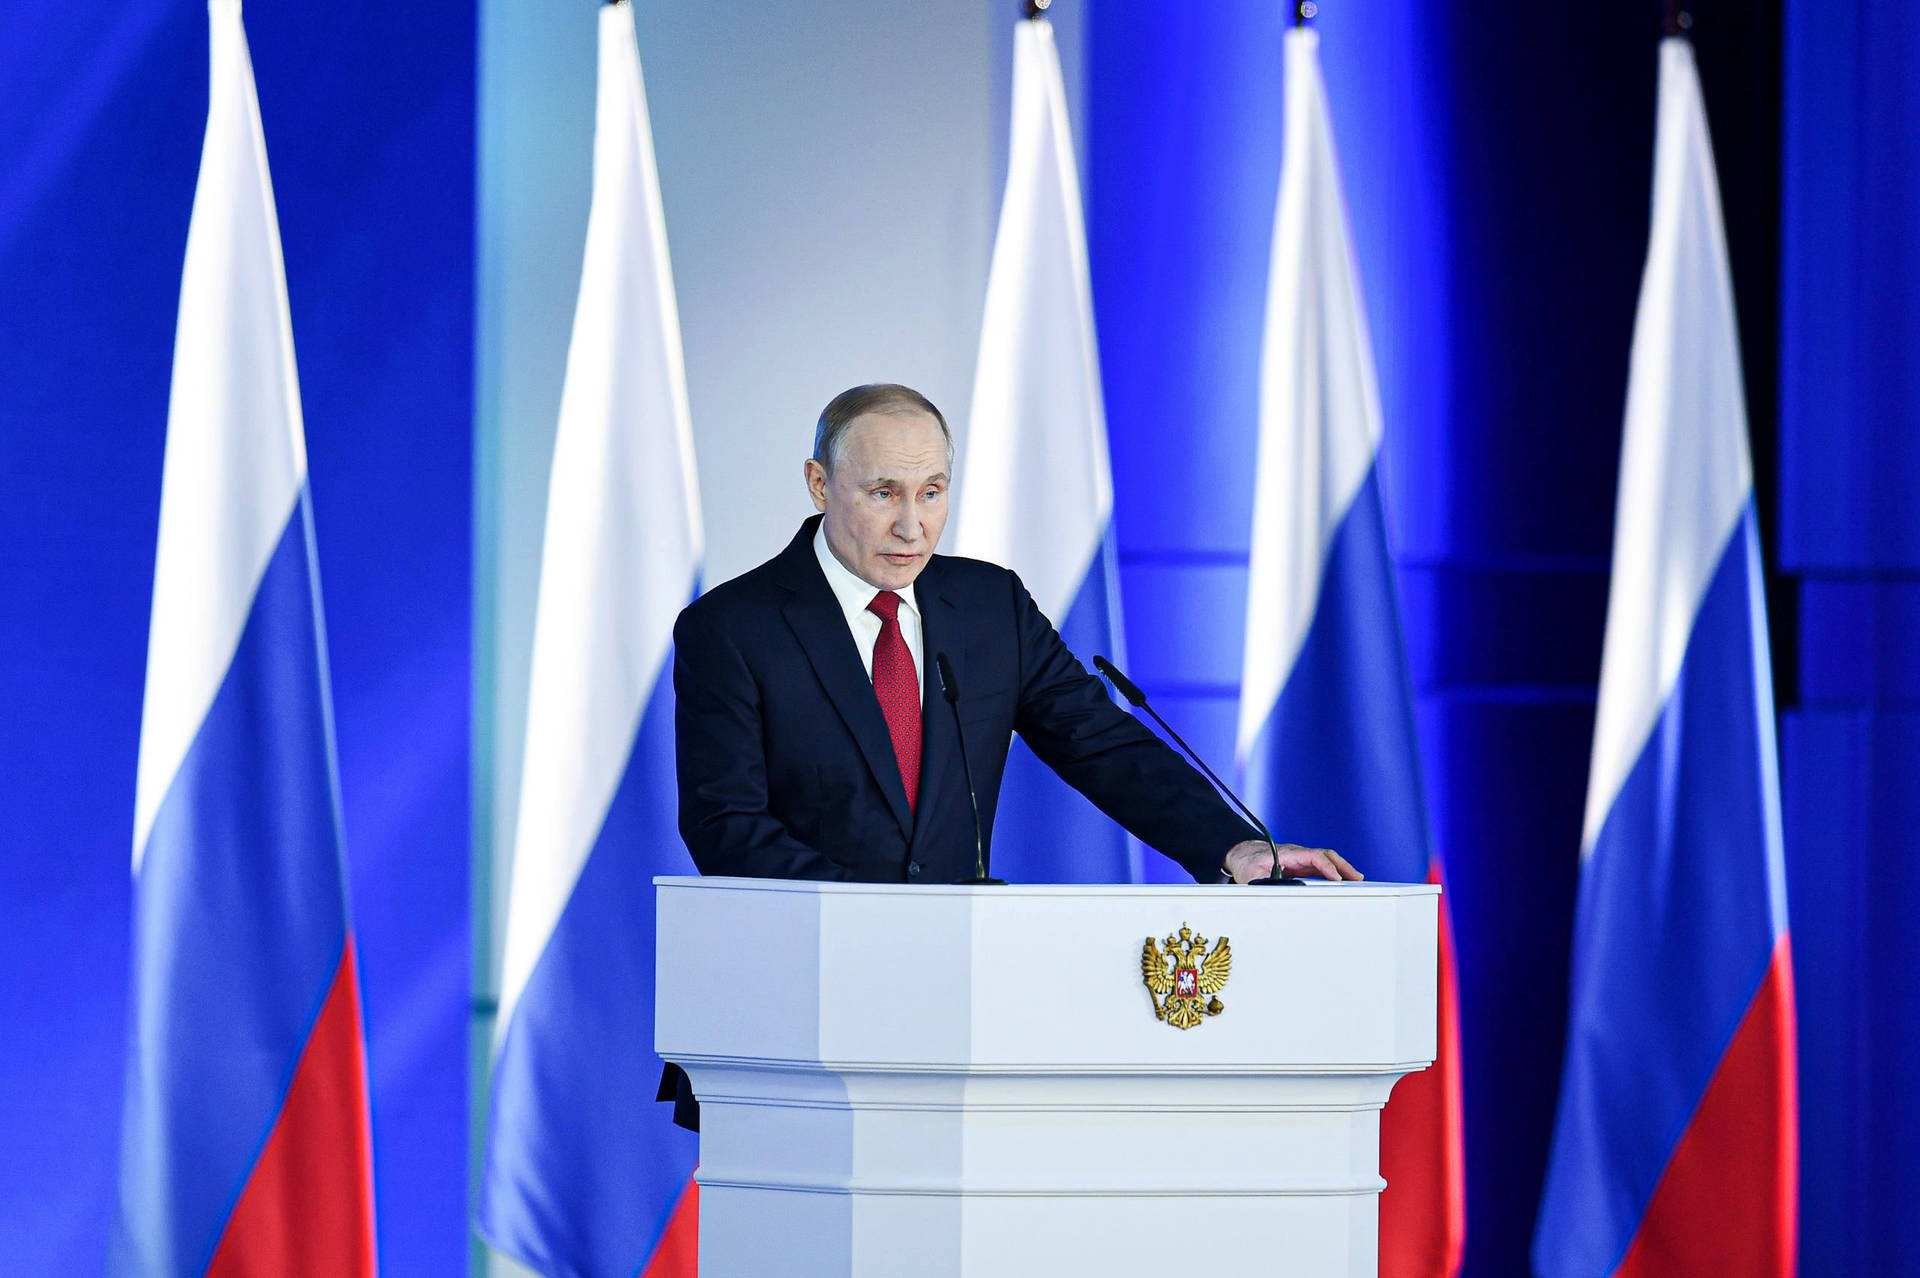 Vladimir Putin With Five Flags Behind Background